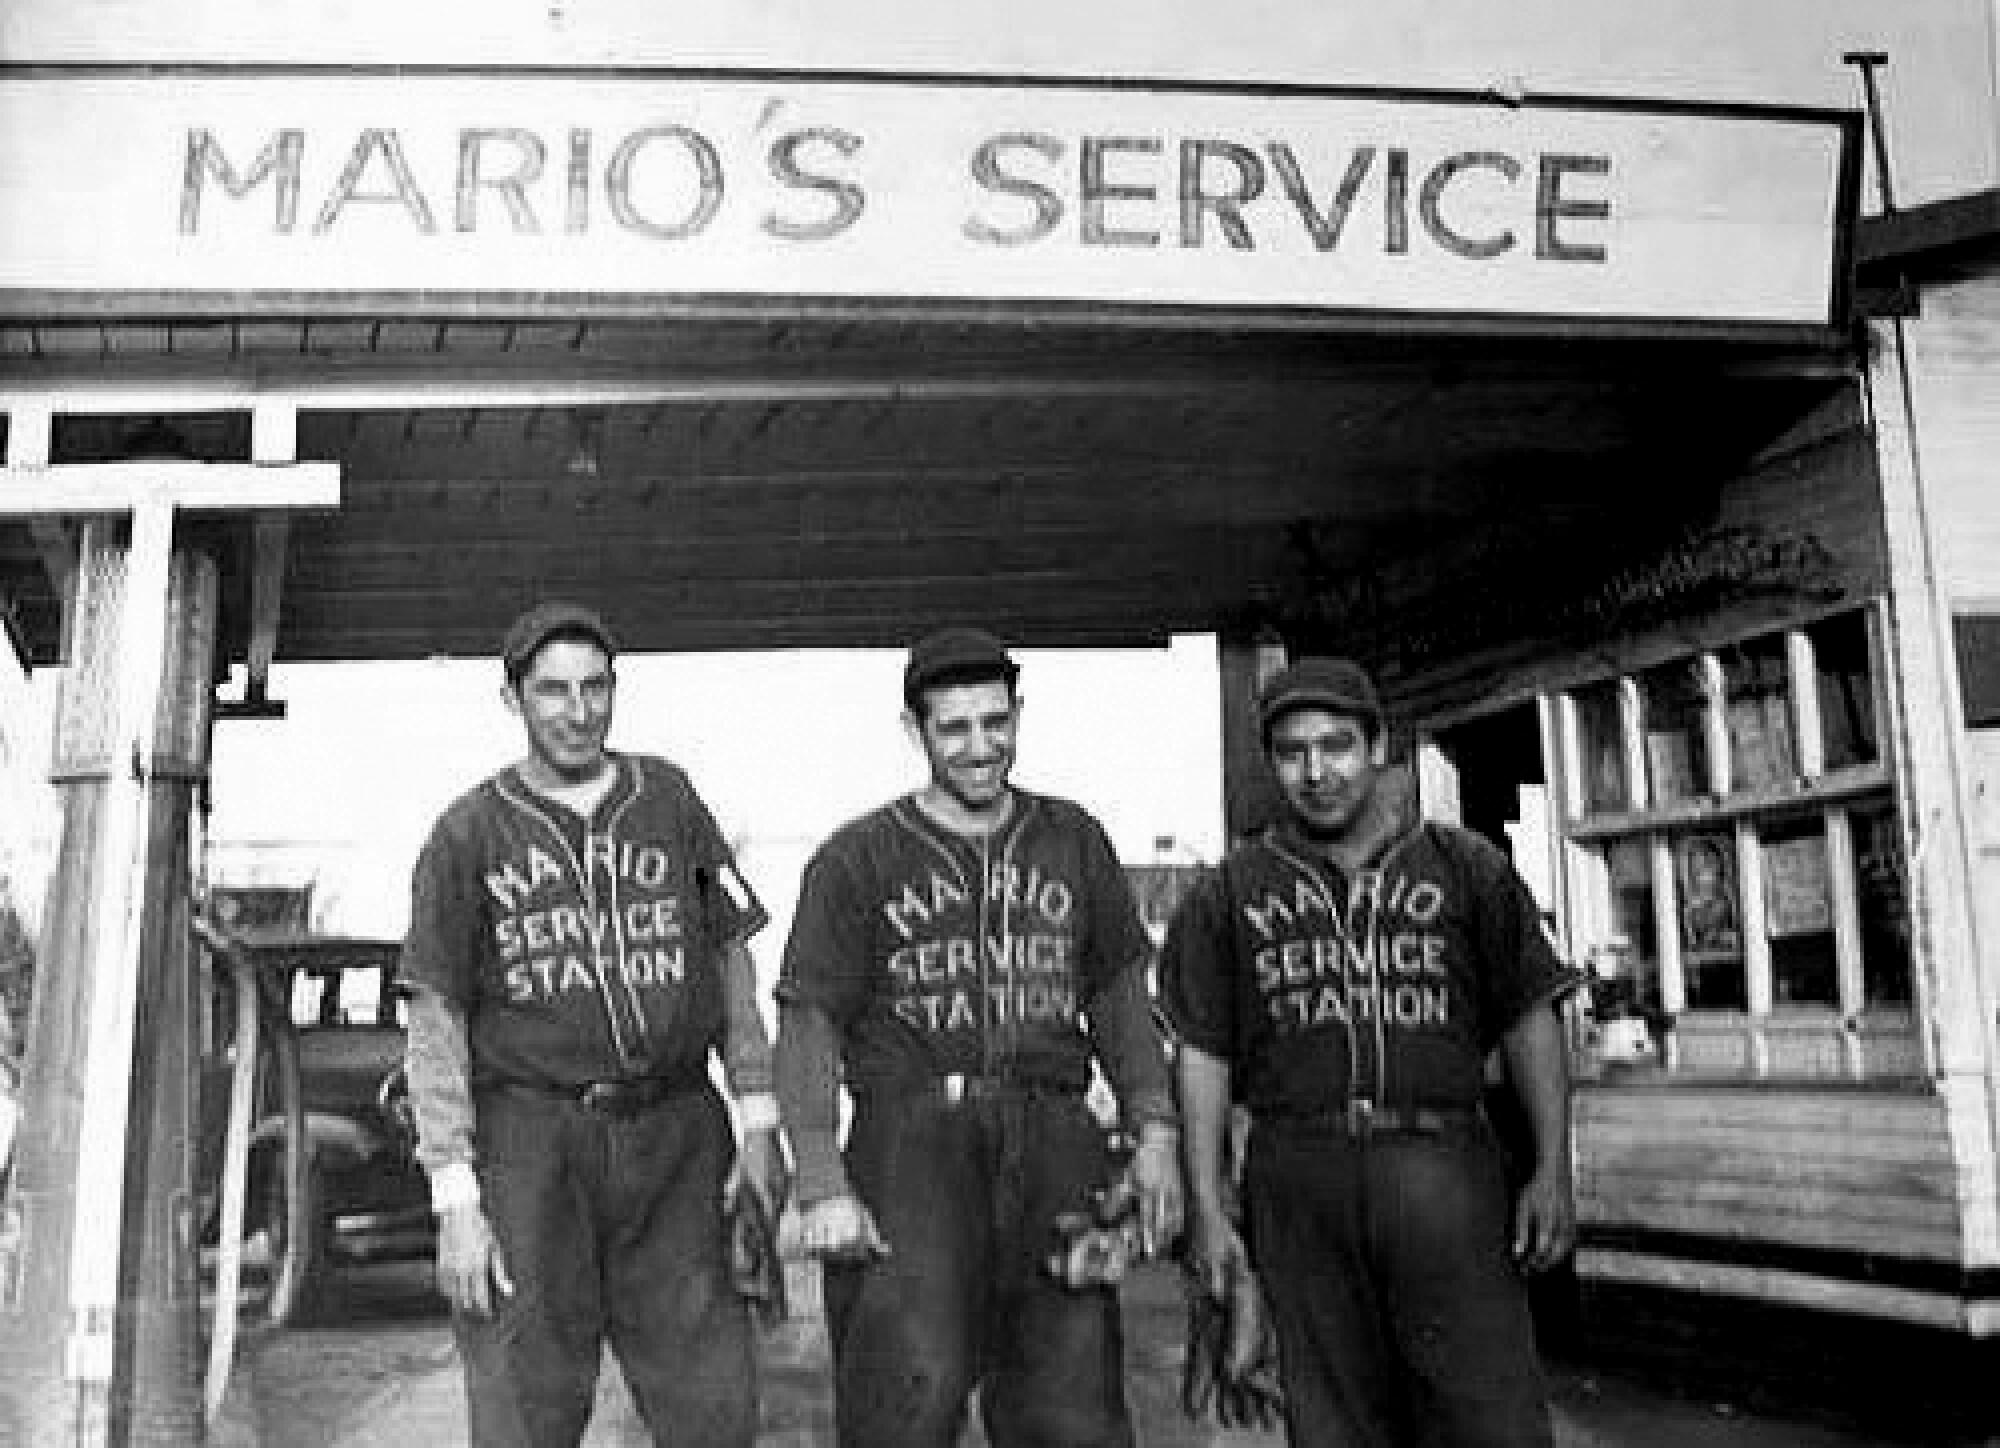 Members of the Mario Service Station team.